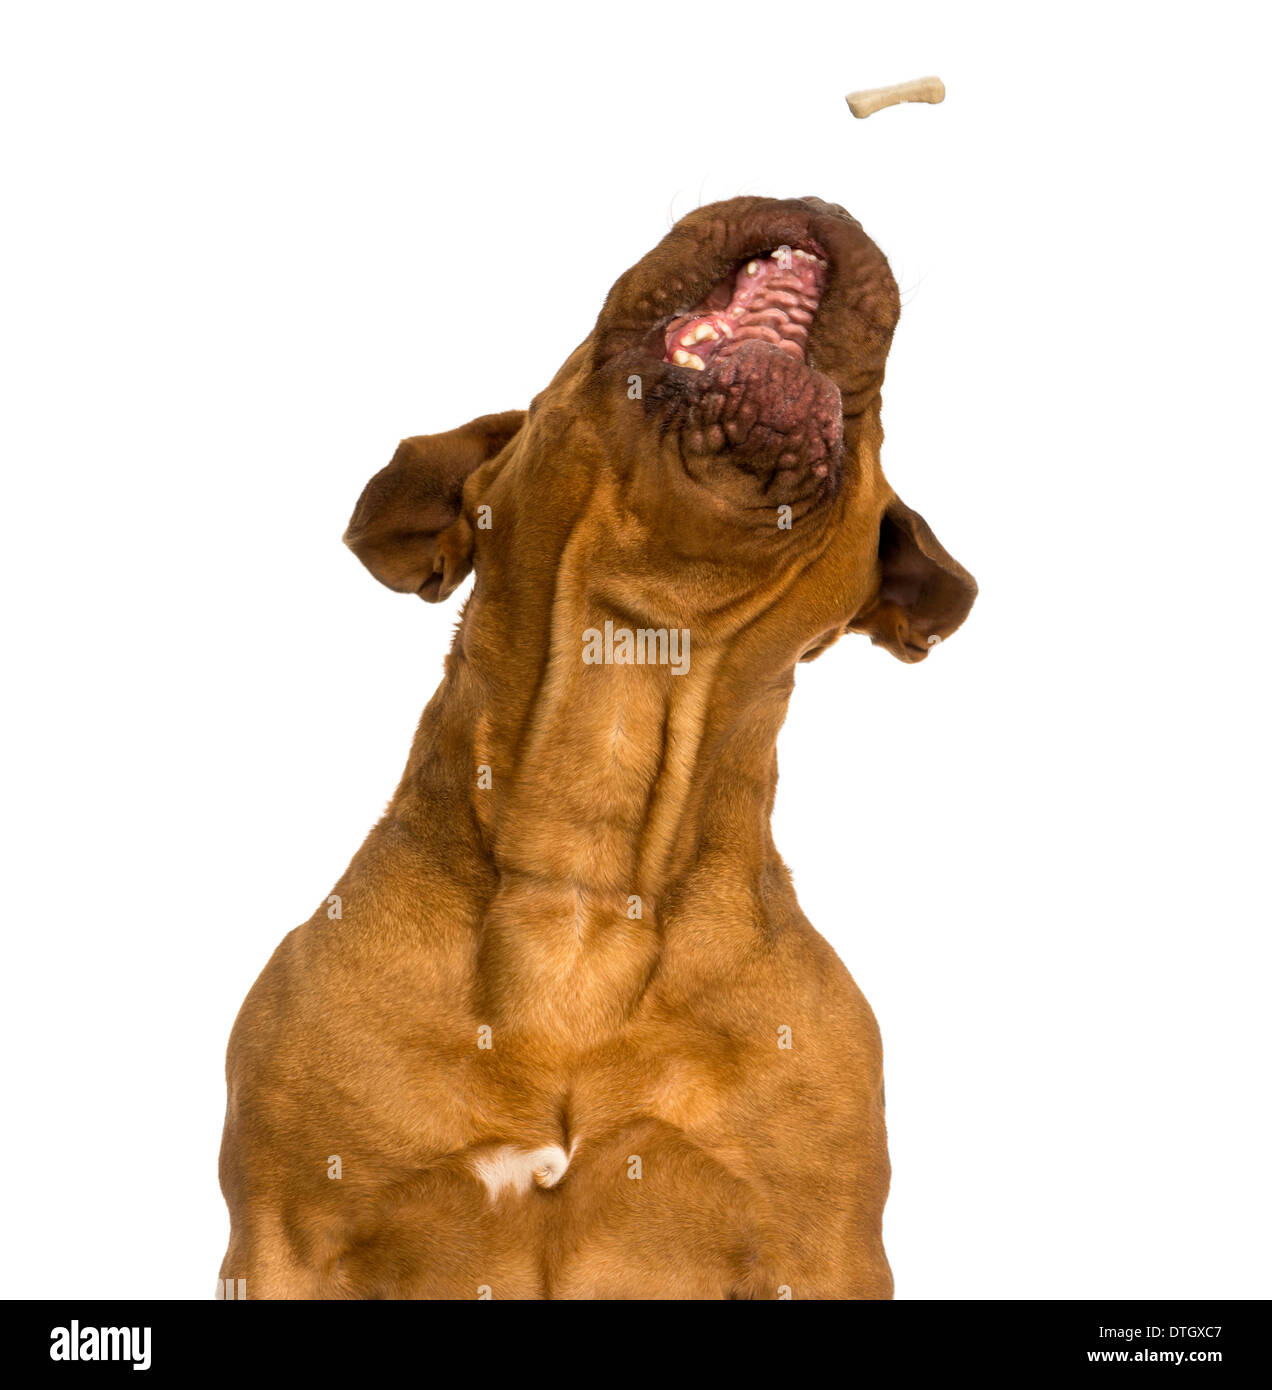 Close-up of a Dogue de Bordeaux catching food, mouth opened, against white background Stock Photo